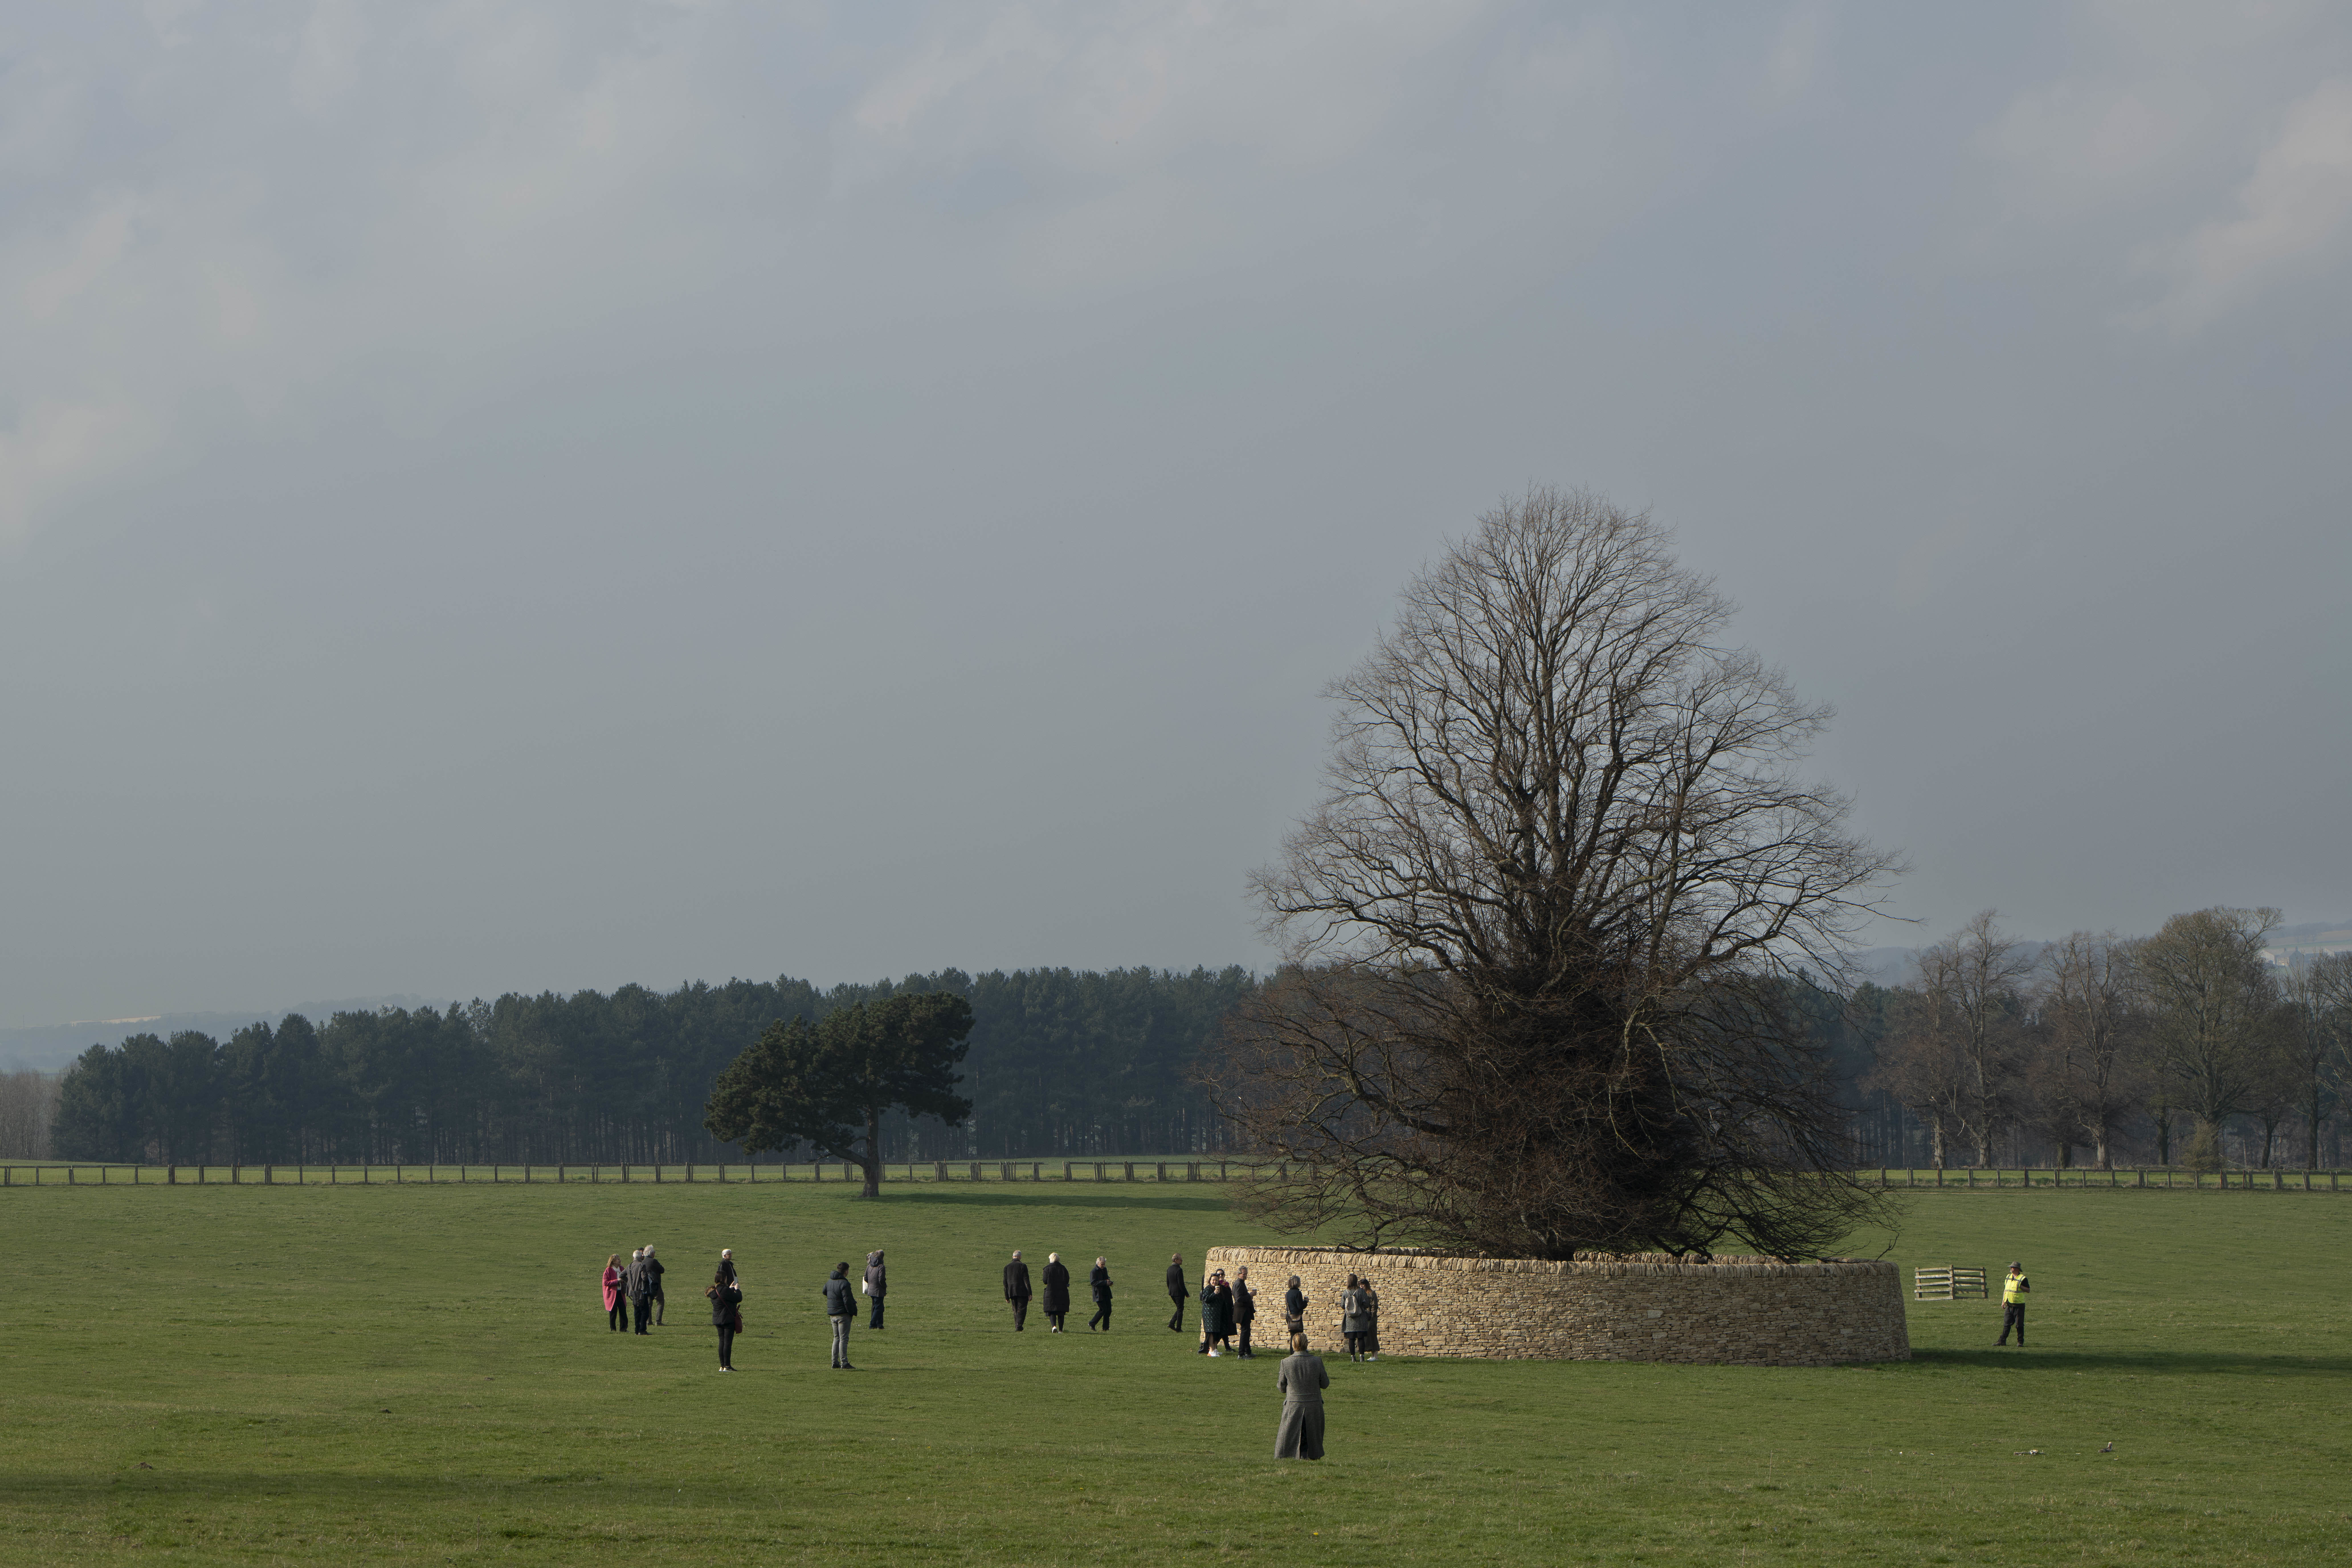 People standing in a field admiring Peter's Fold, a dry stone wall encircling a large tree.